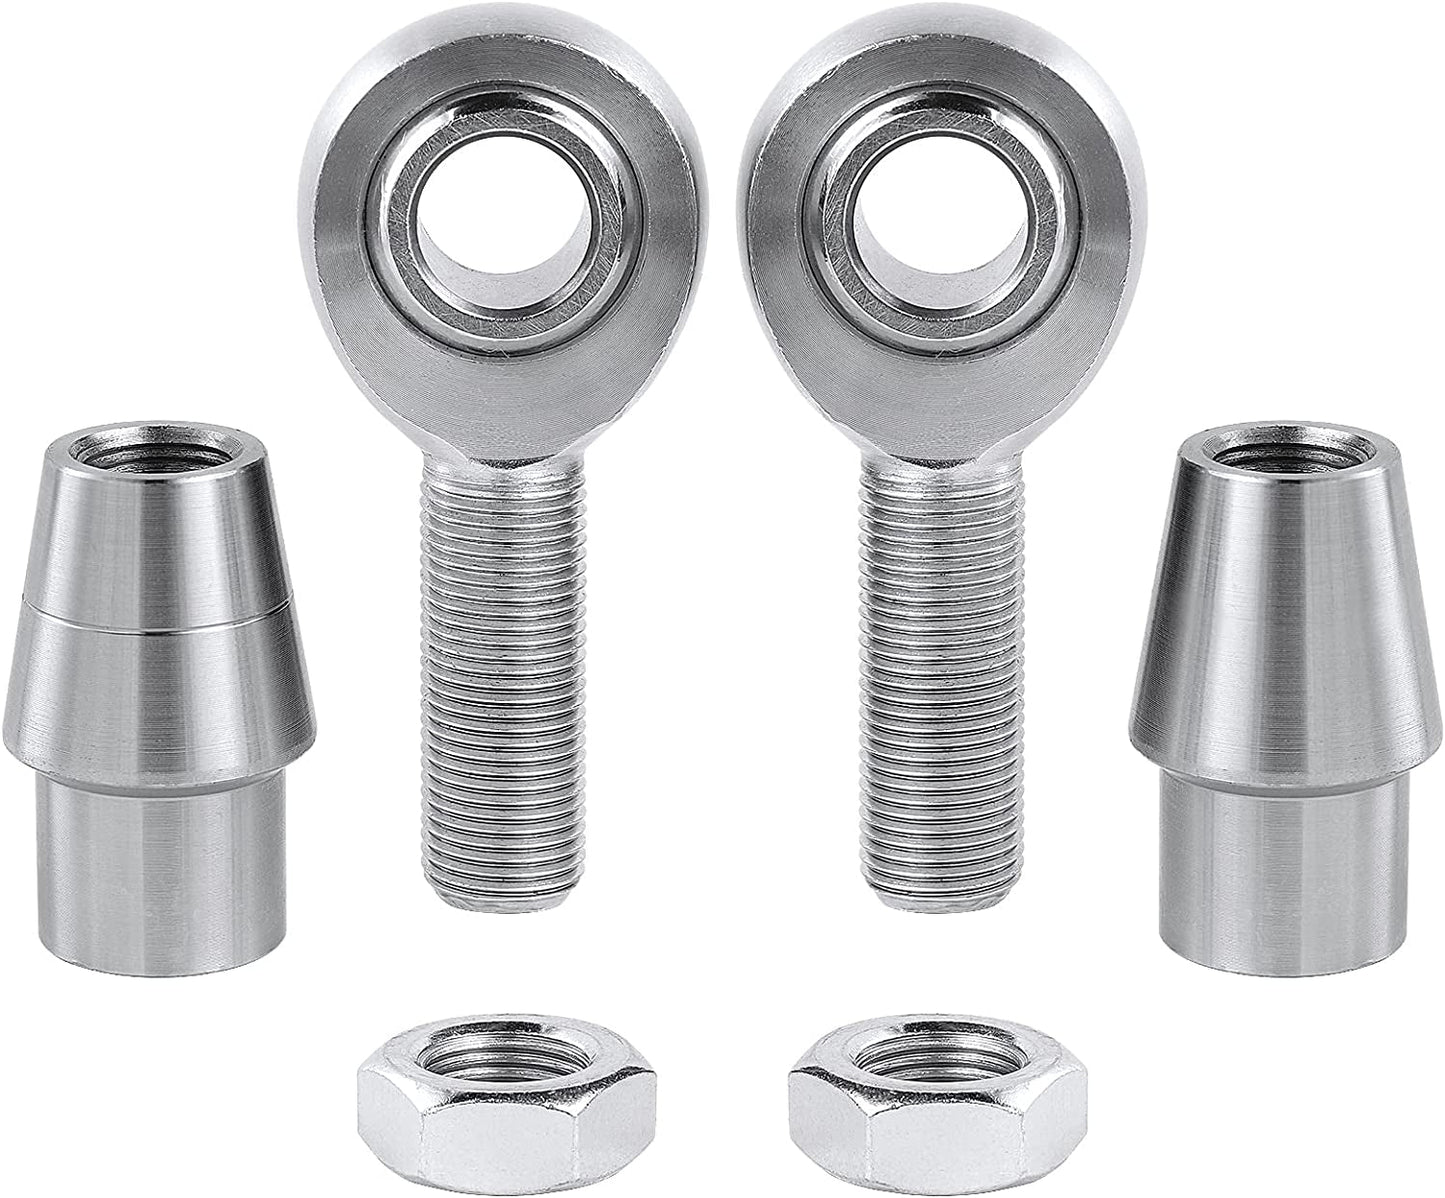 5/8” Heim Joints Rod End Kit,.625" Chromoly Heim Joints Panhard Rod End Kit for Steering,Suspension, Traction Bars, Right&Left Hand Thread Steering Joints with Tube Adapters & Jam Nuts - 2Set